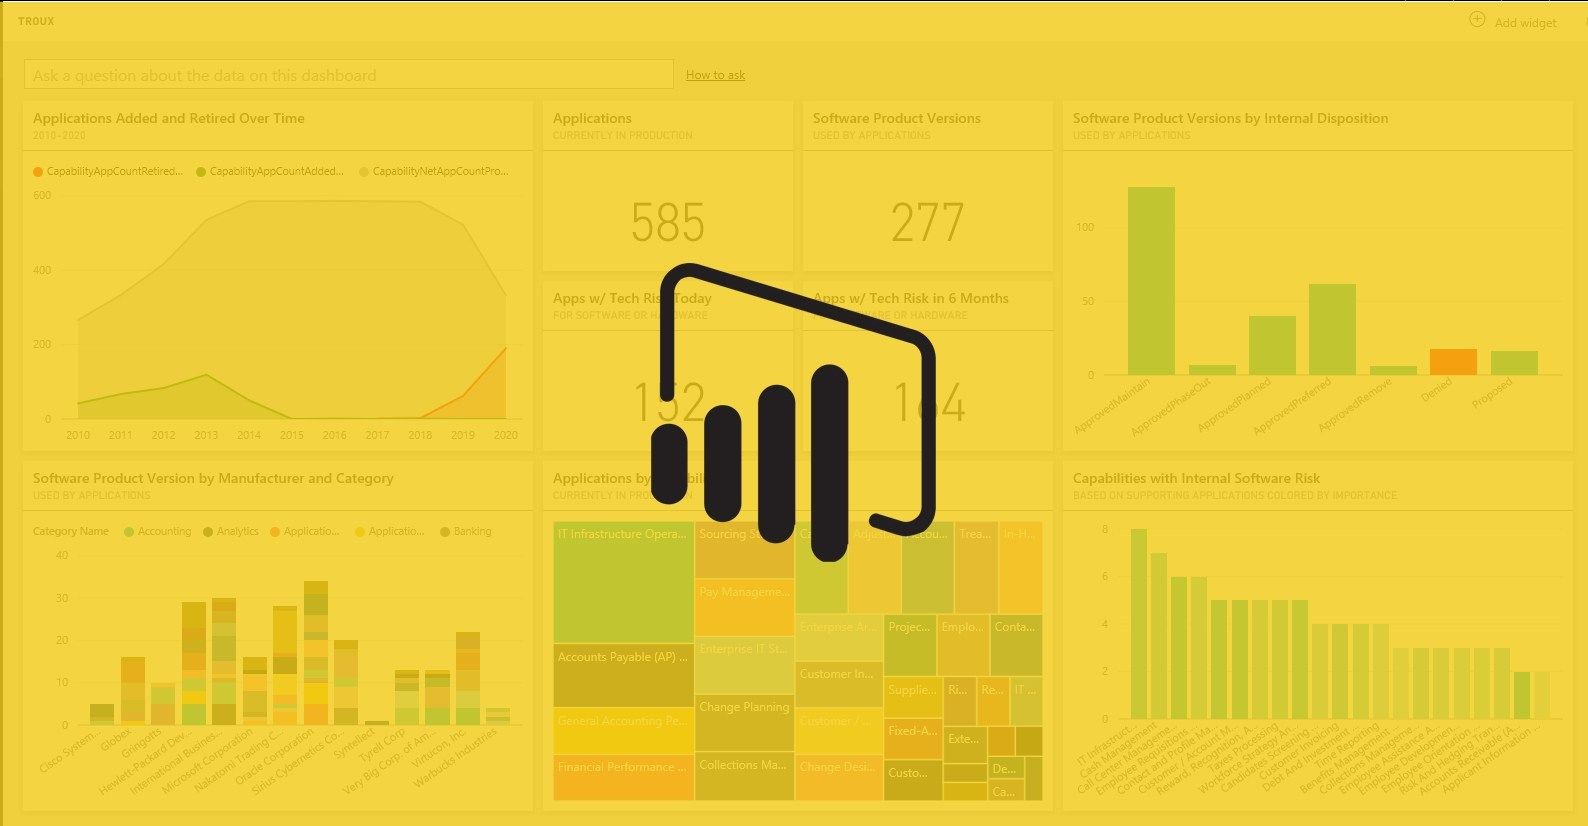 Three Things You Can do to Improve the Design of Any Power BI Report